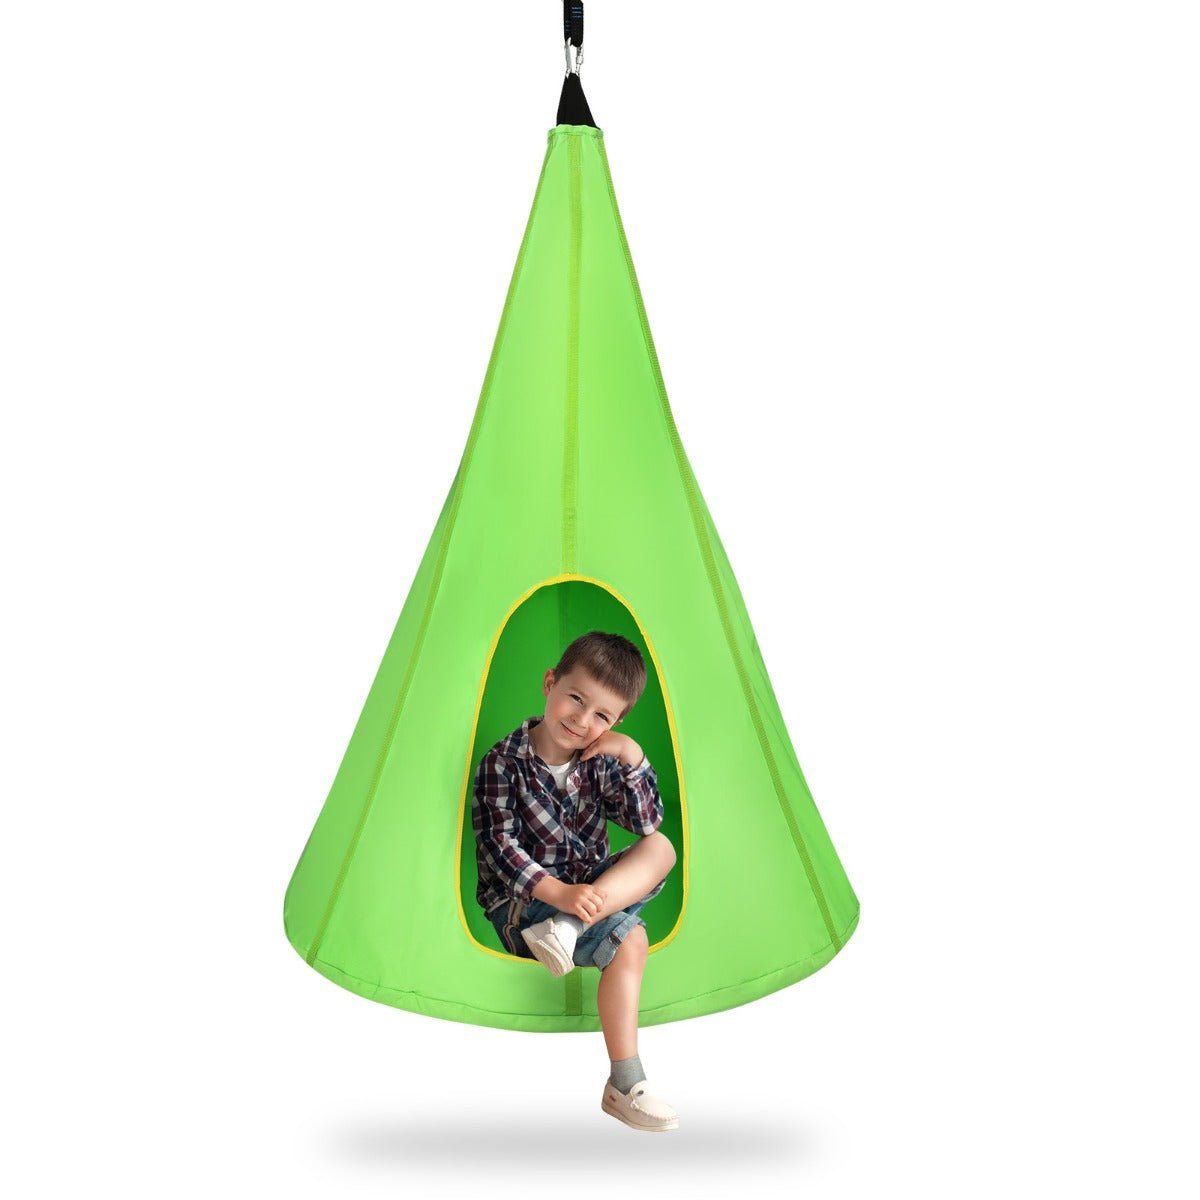 Nature Inspired Fun: Kids Nest Swing Tent Green 80cm, Play in the Green